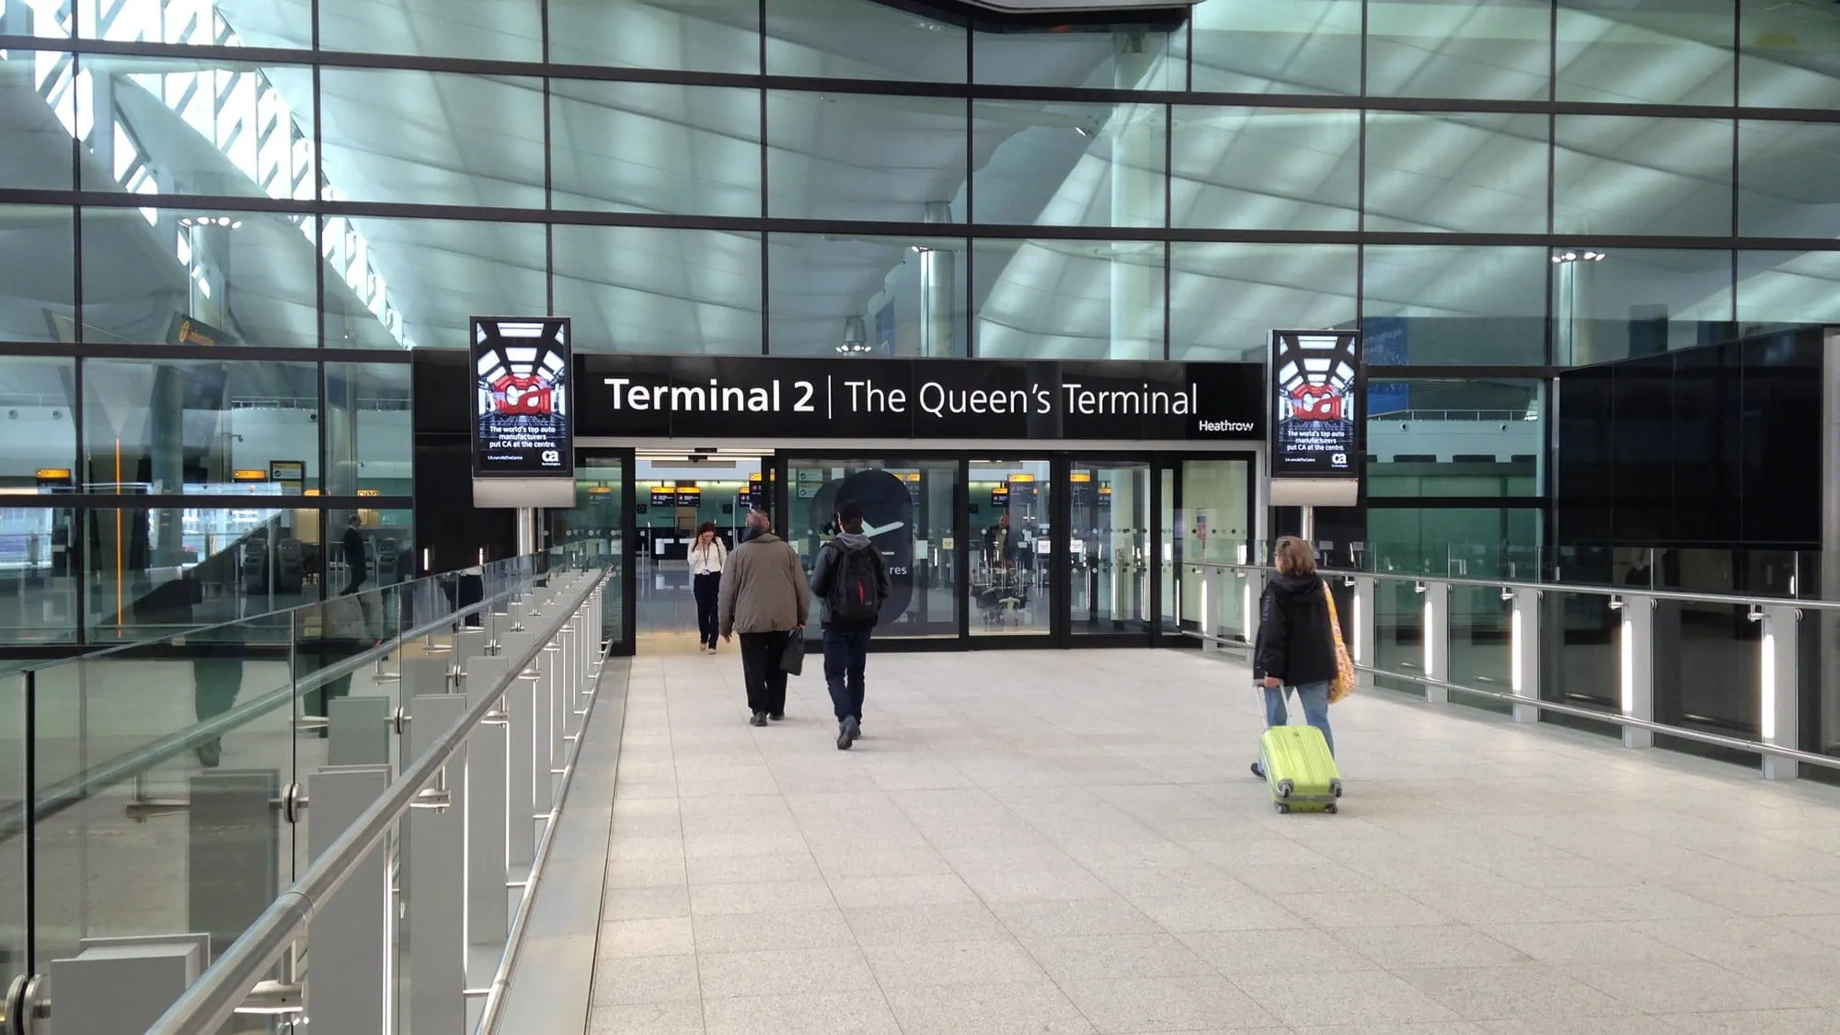 Passengers approaching the entrance of Terminal 2 at Heathrow Airport